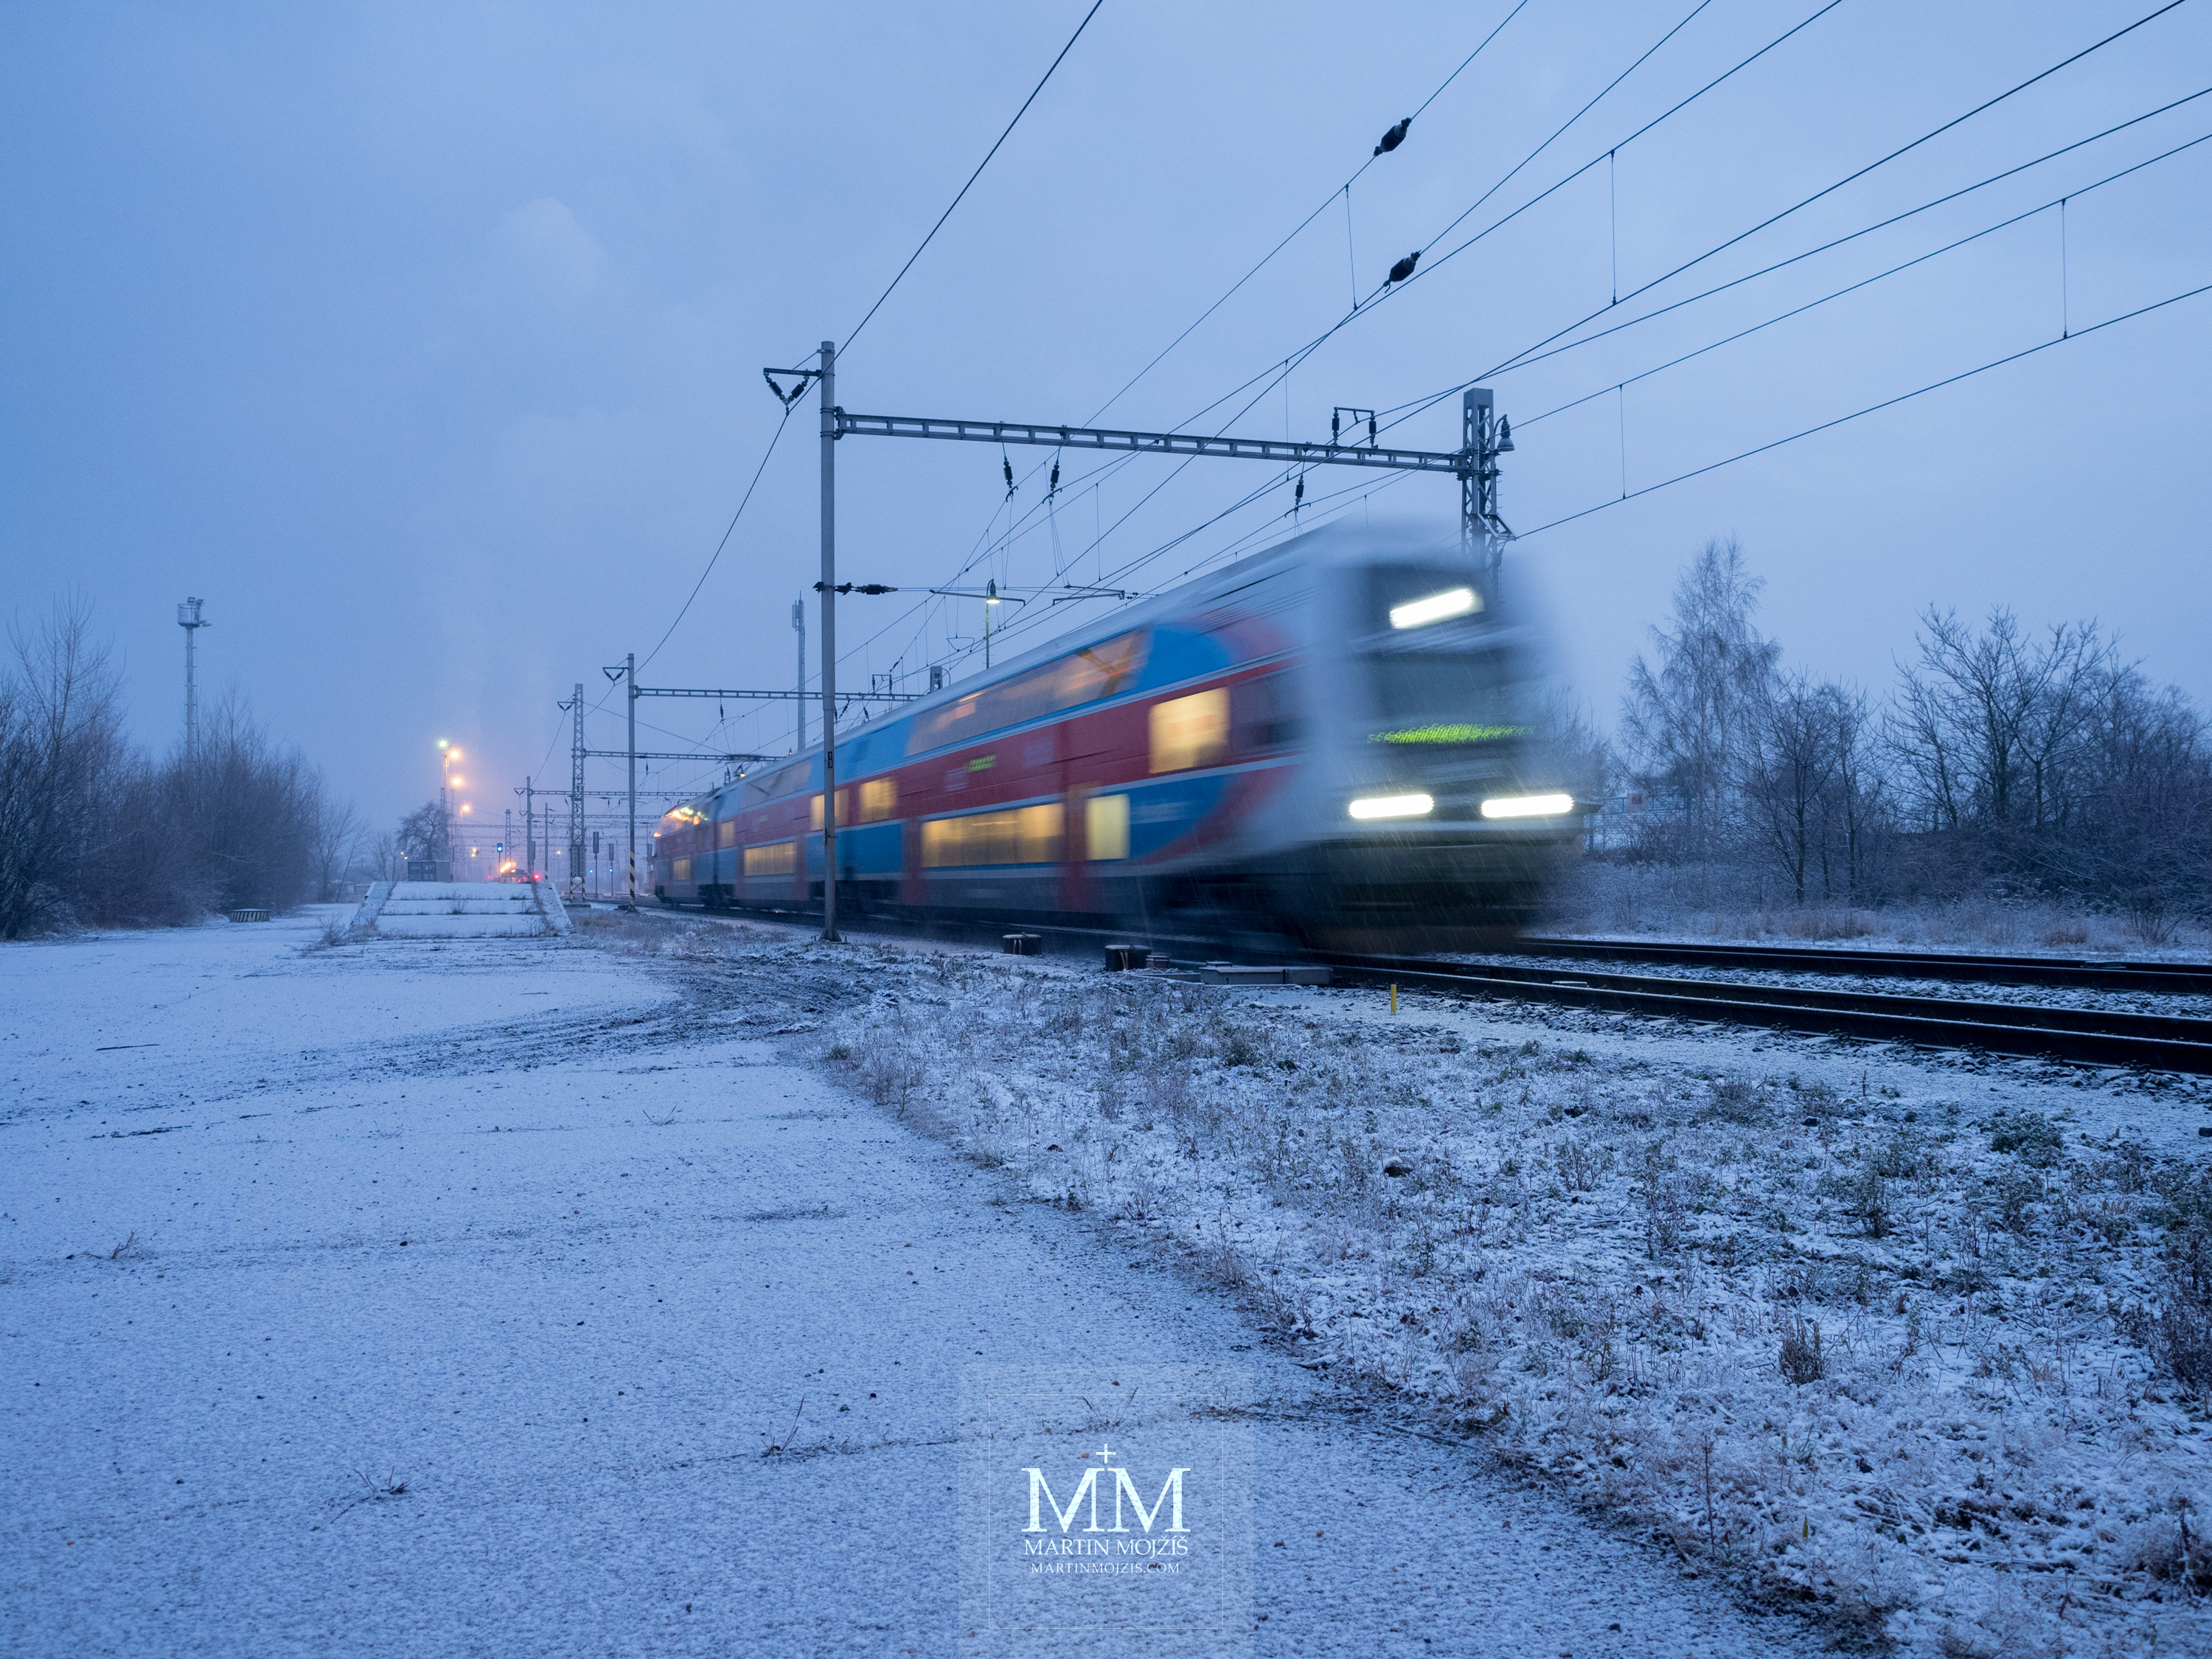 A train departs from a snowy station in a frosty winter morning. Photograph created with the Olympus 12 - 40 mm 2.8 Pro lens.